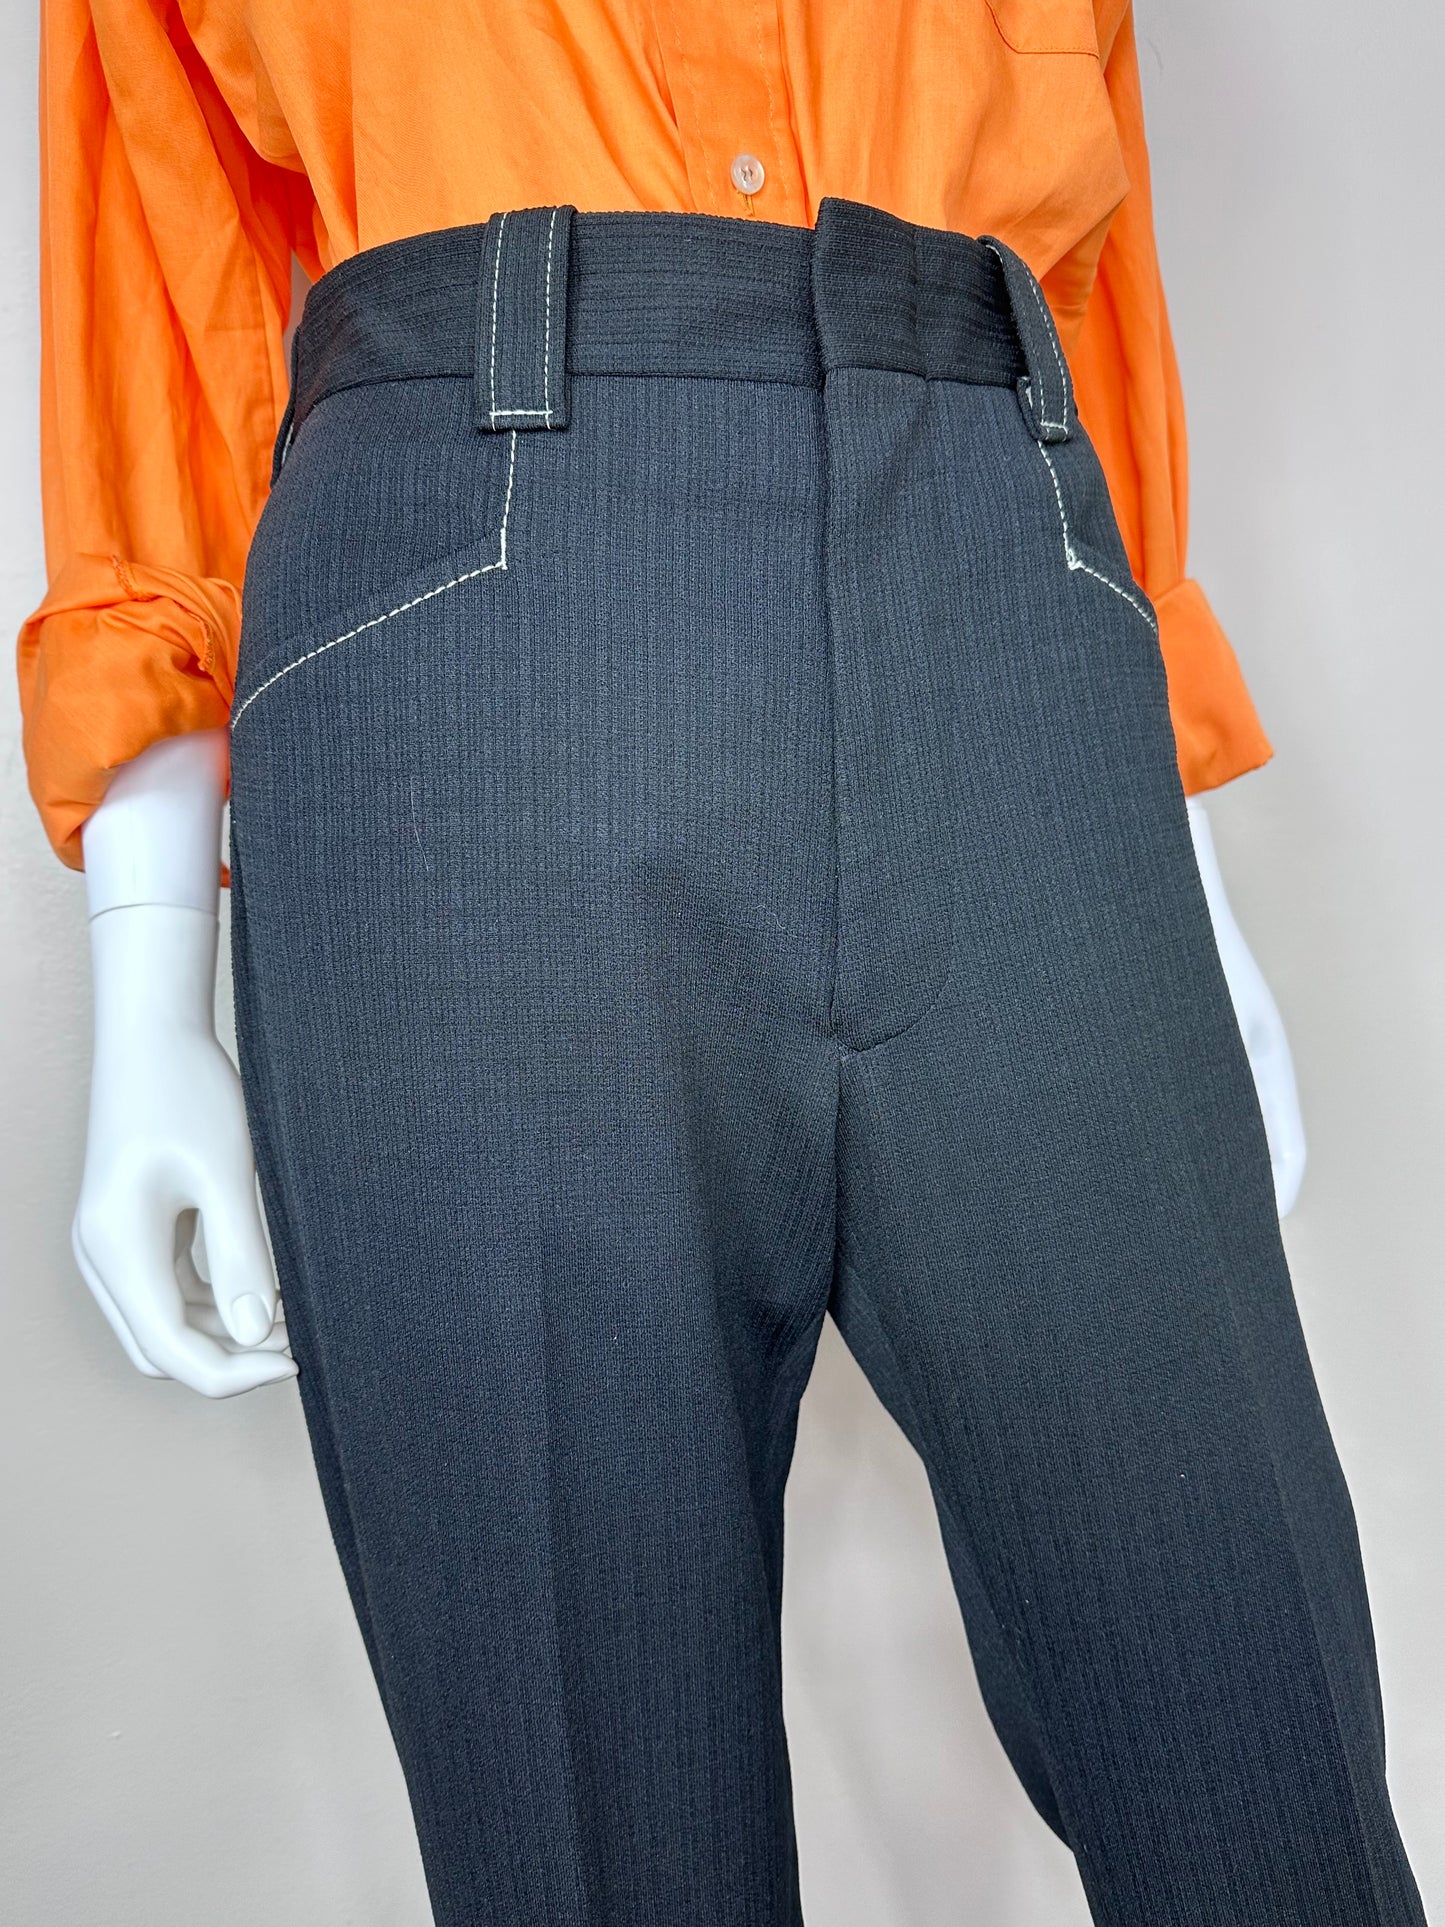 1970s Black Leisure Suit, Kings Road Sears The Men’s Store Size S/M, Jacket and Pants